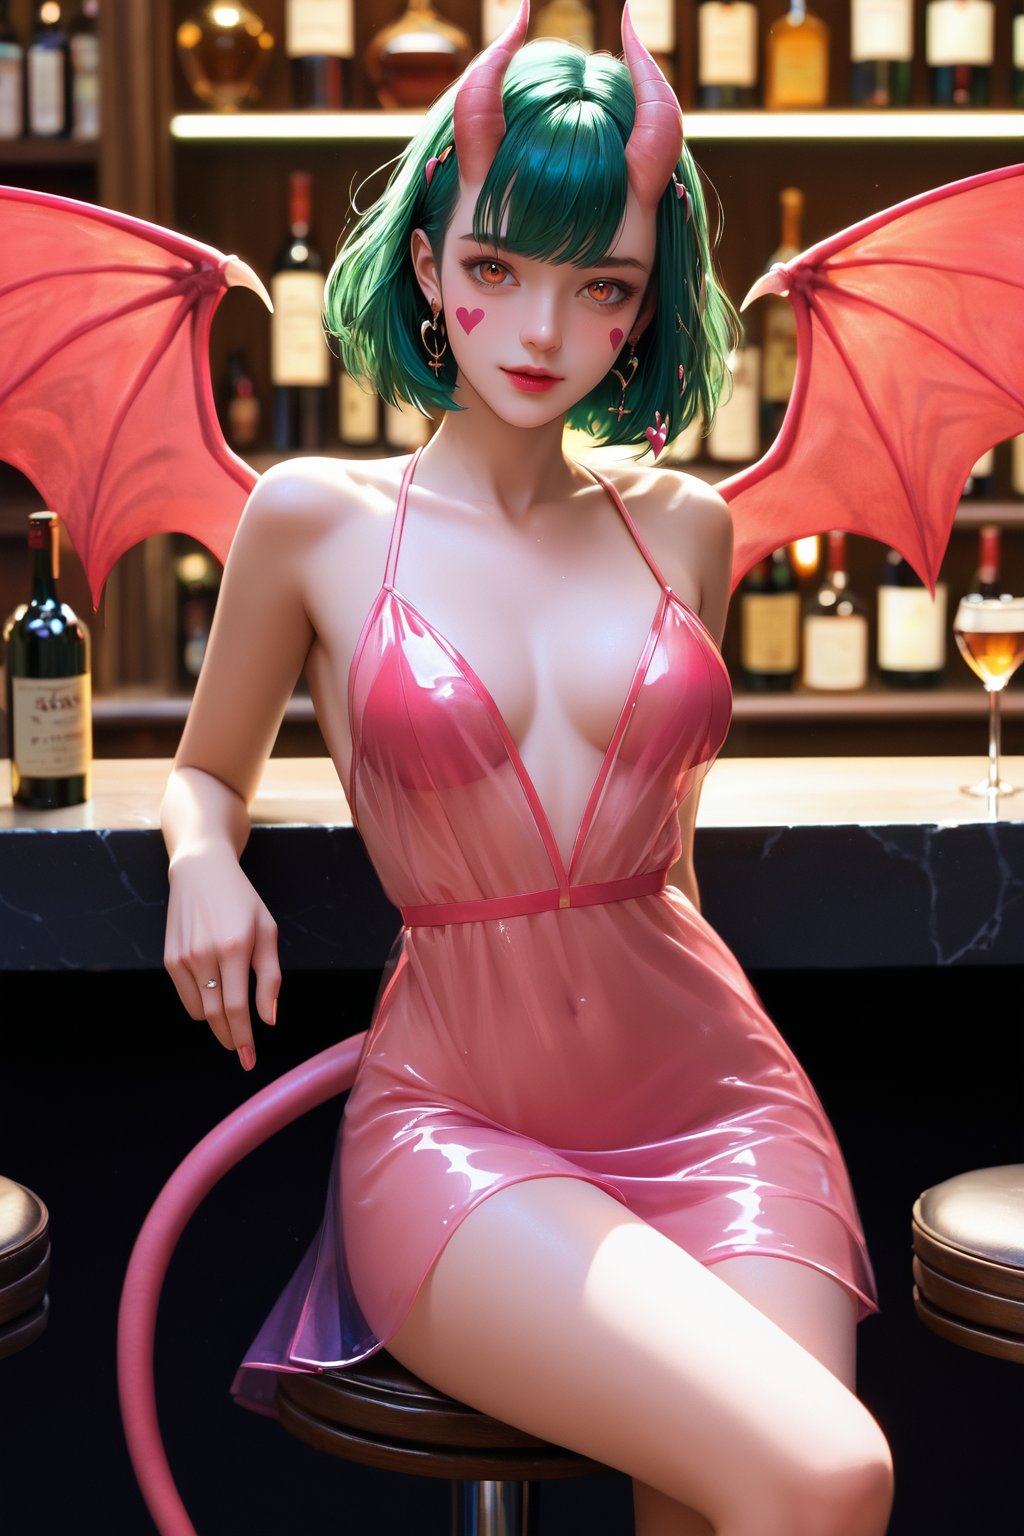 score_9, score_8_up, score_7_up, rating_safe, 45 year old dark green haired succubus in a Fantasy bar, pink skin, wings, tail, transparent gown, three quarter angle view posing, large tits, clothed, emotional facial expression, (best quality:1.3)